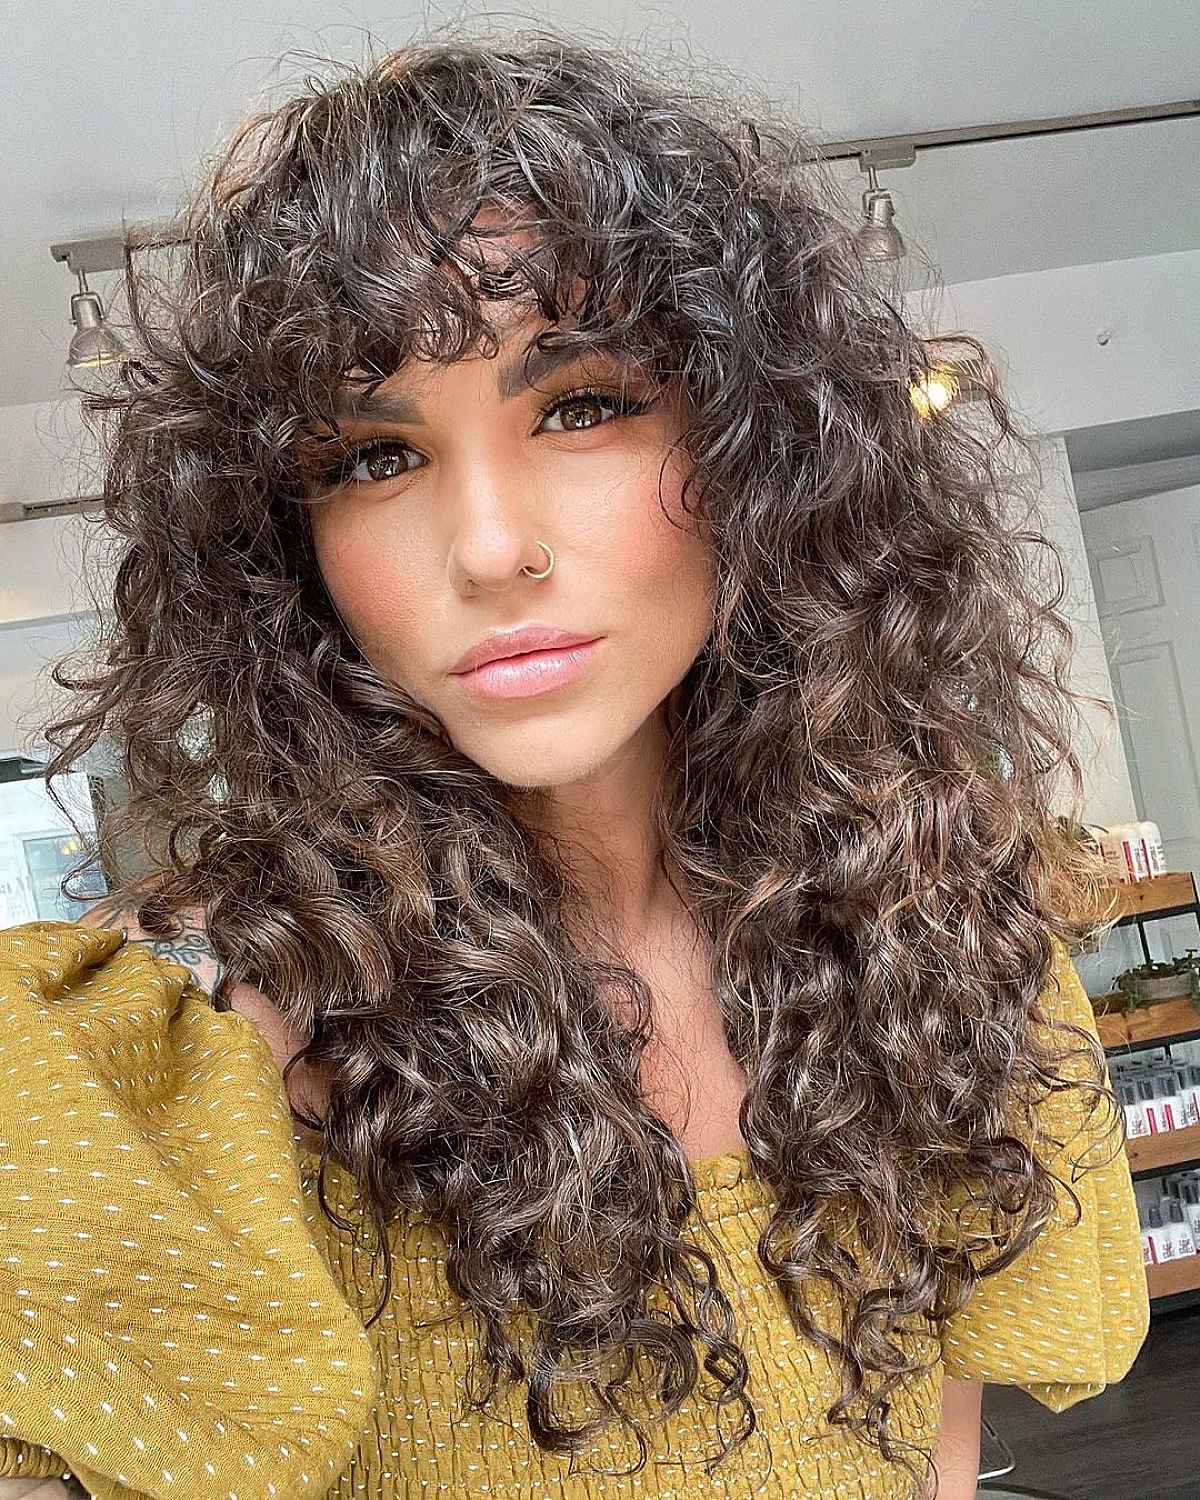 Shaggy Curly Hair with Bangs